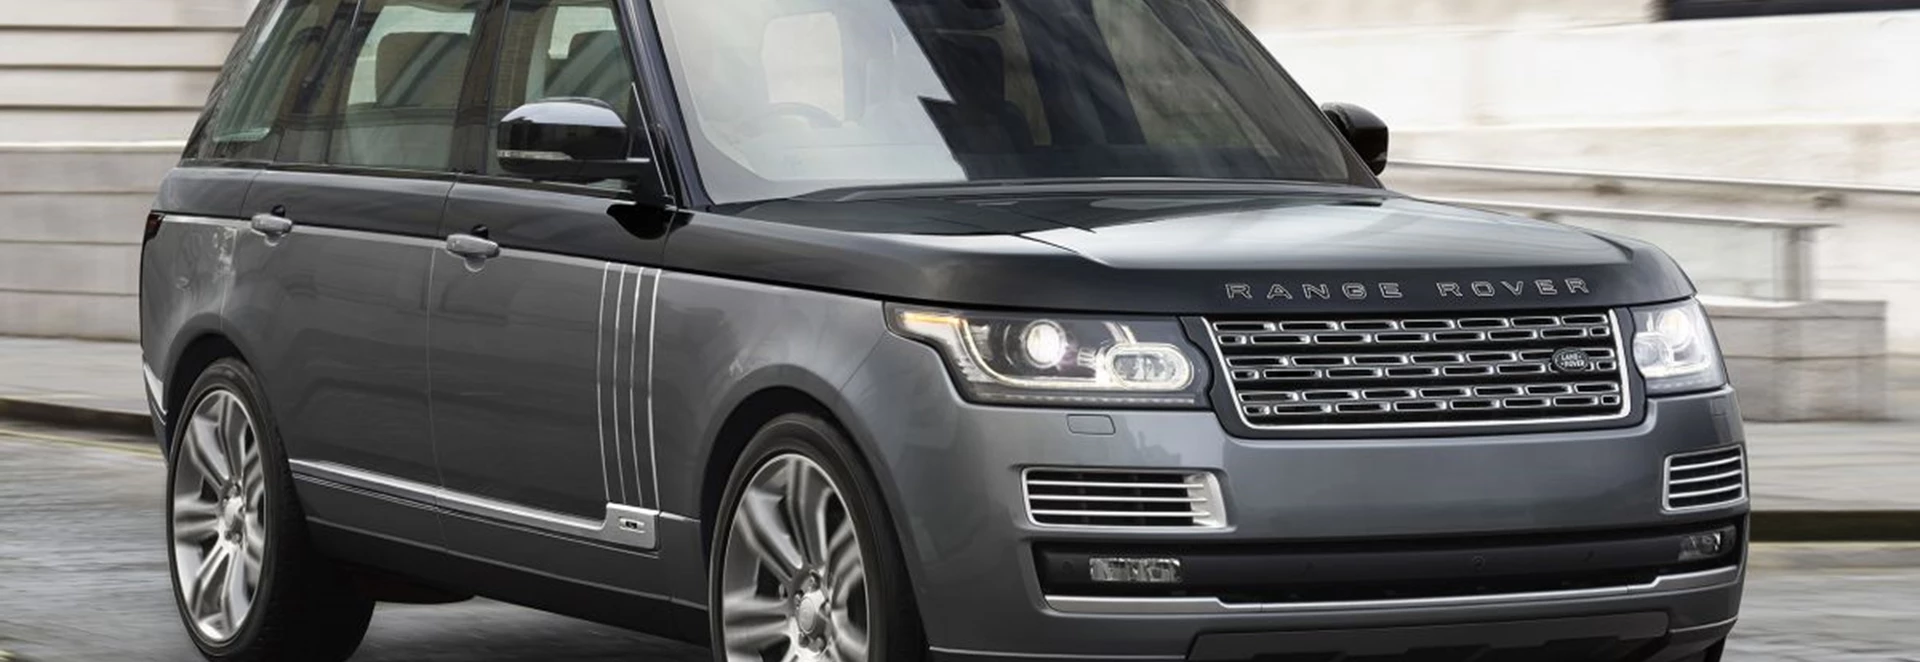 Most powerful Range Rover to star in New York